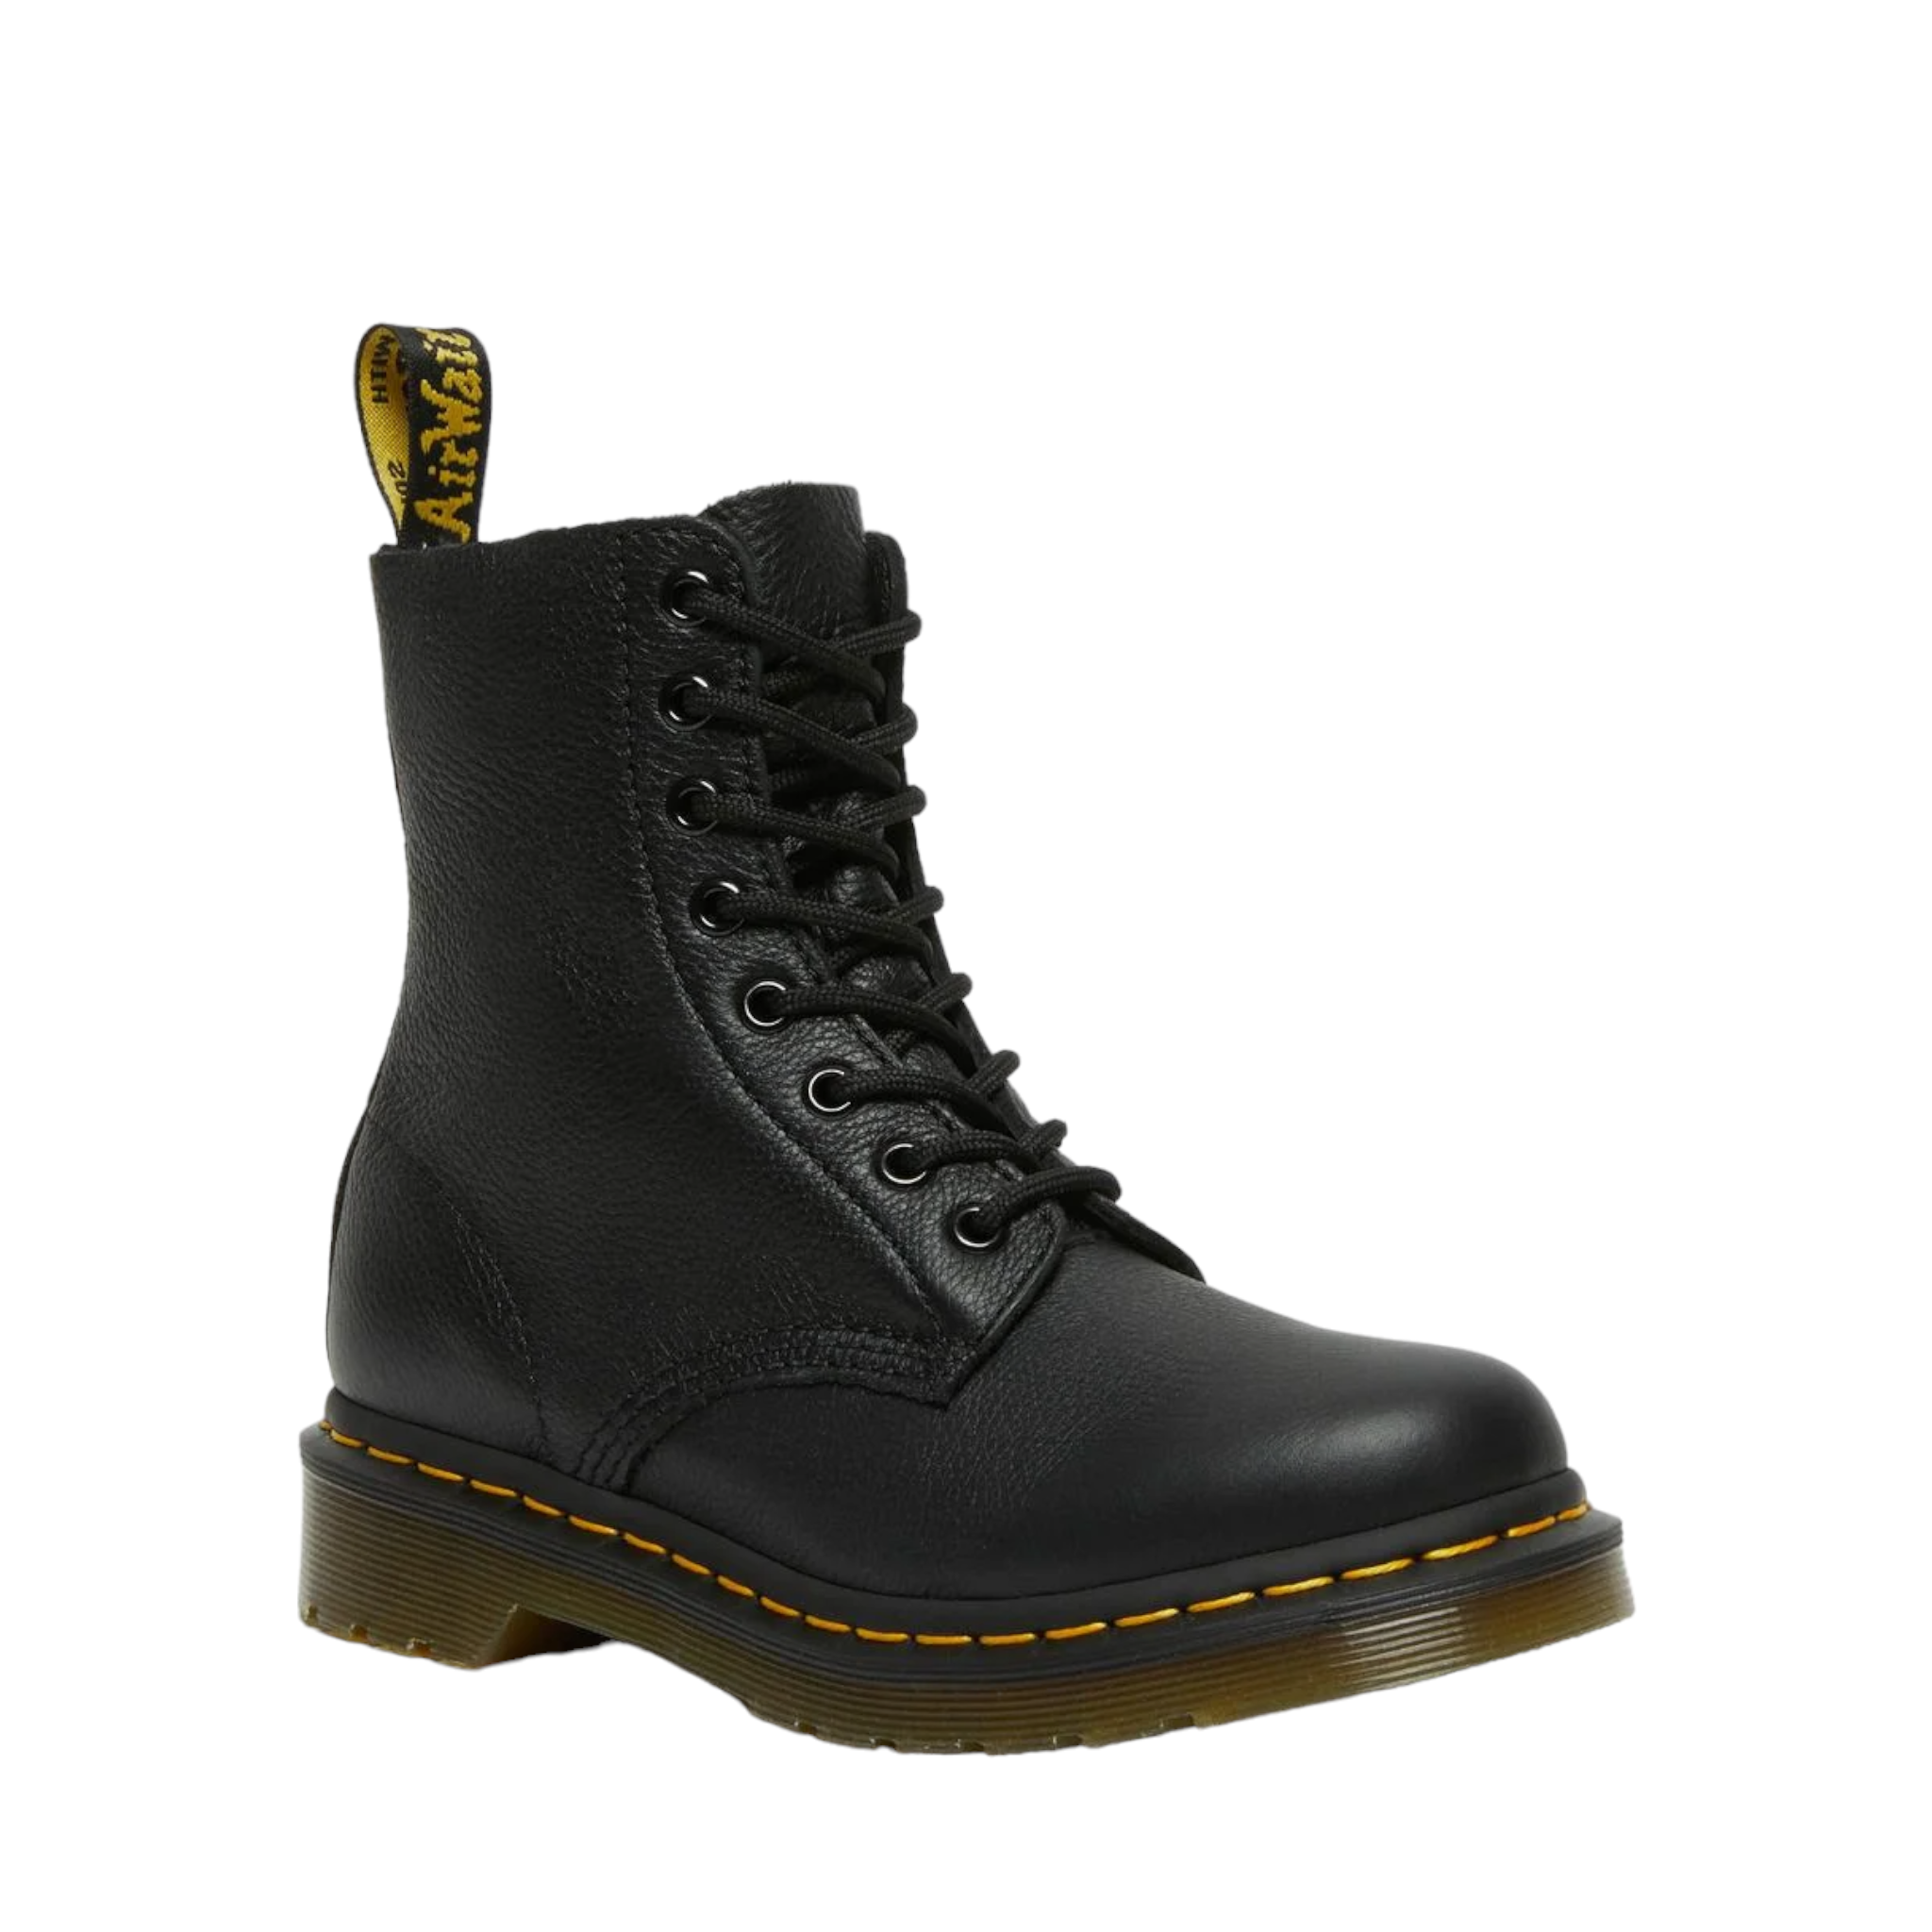 Shop Pascal 8 Eye Dr Martens - with shoe&amp;me - from Dr. Martens - Boots - Boot, Summer, Winter, Womens - [collection]